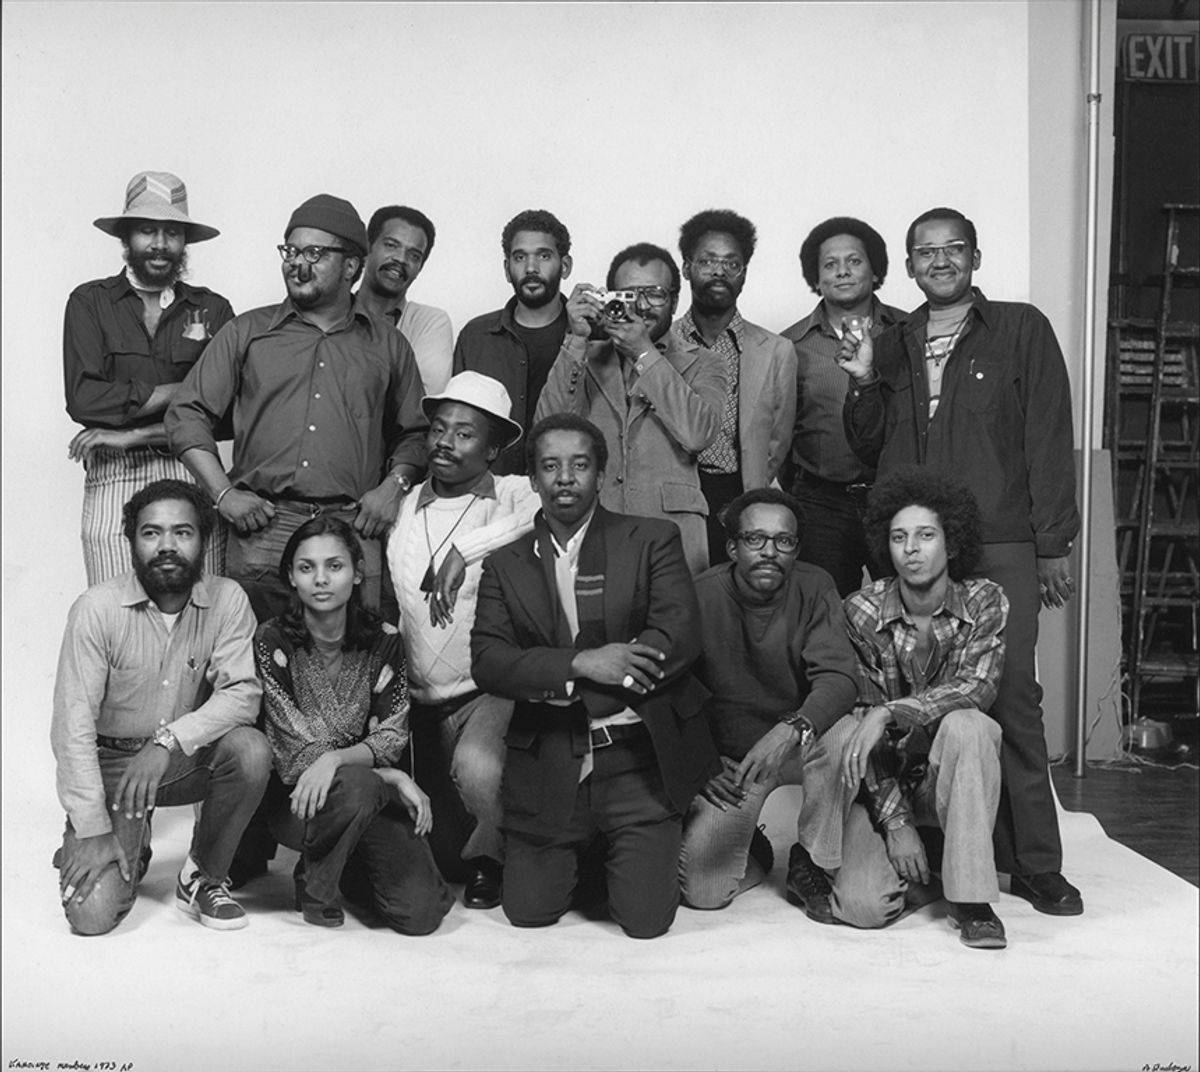 Members of the Kamoinge Workshop in 1973, photographed by the collective member Anthony Barboza © Anthony Barboza